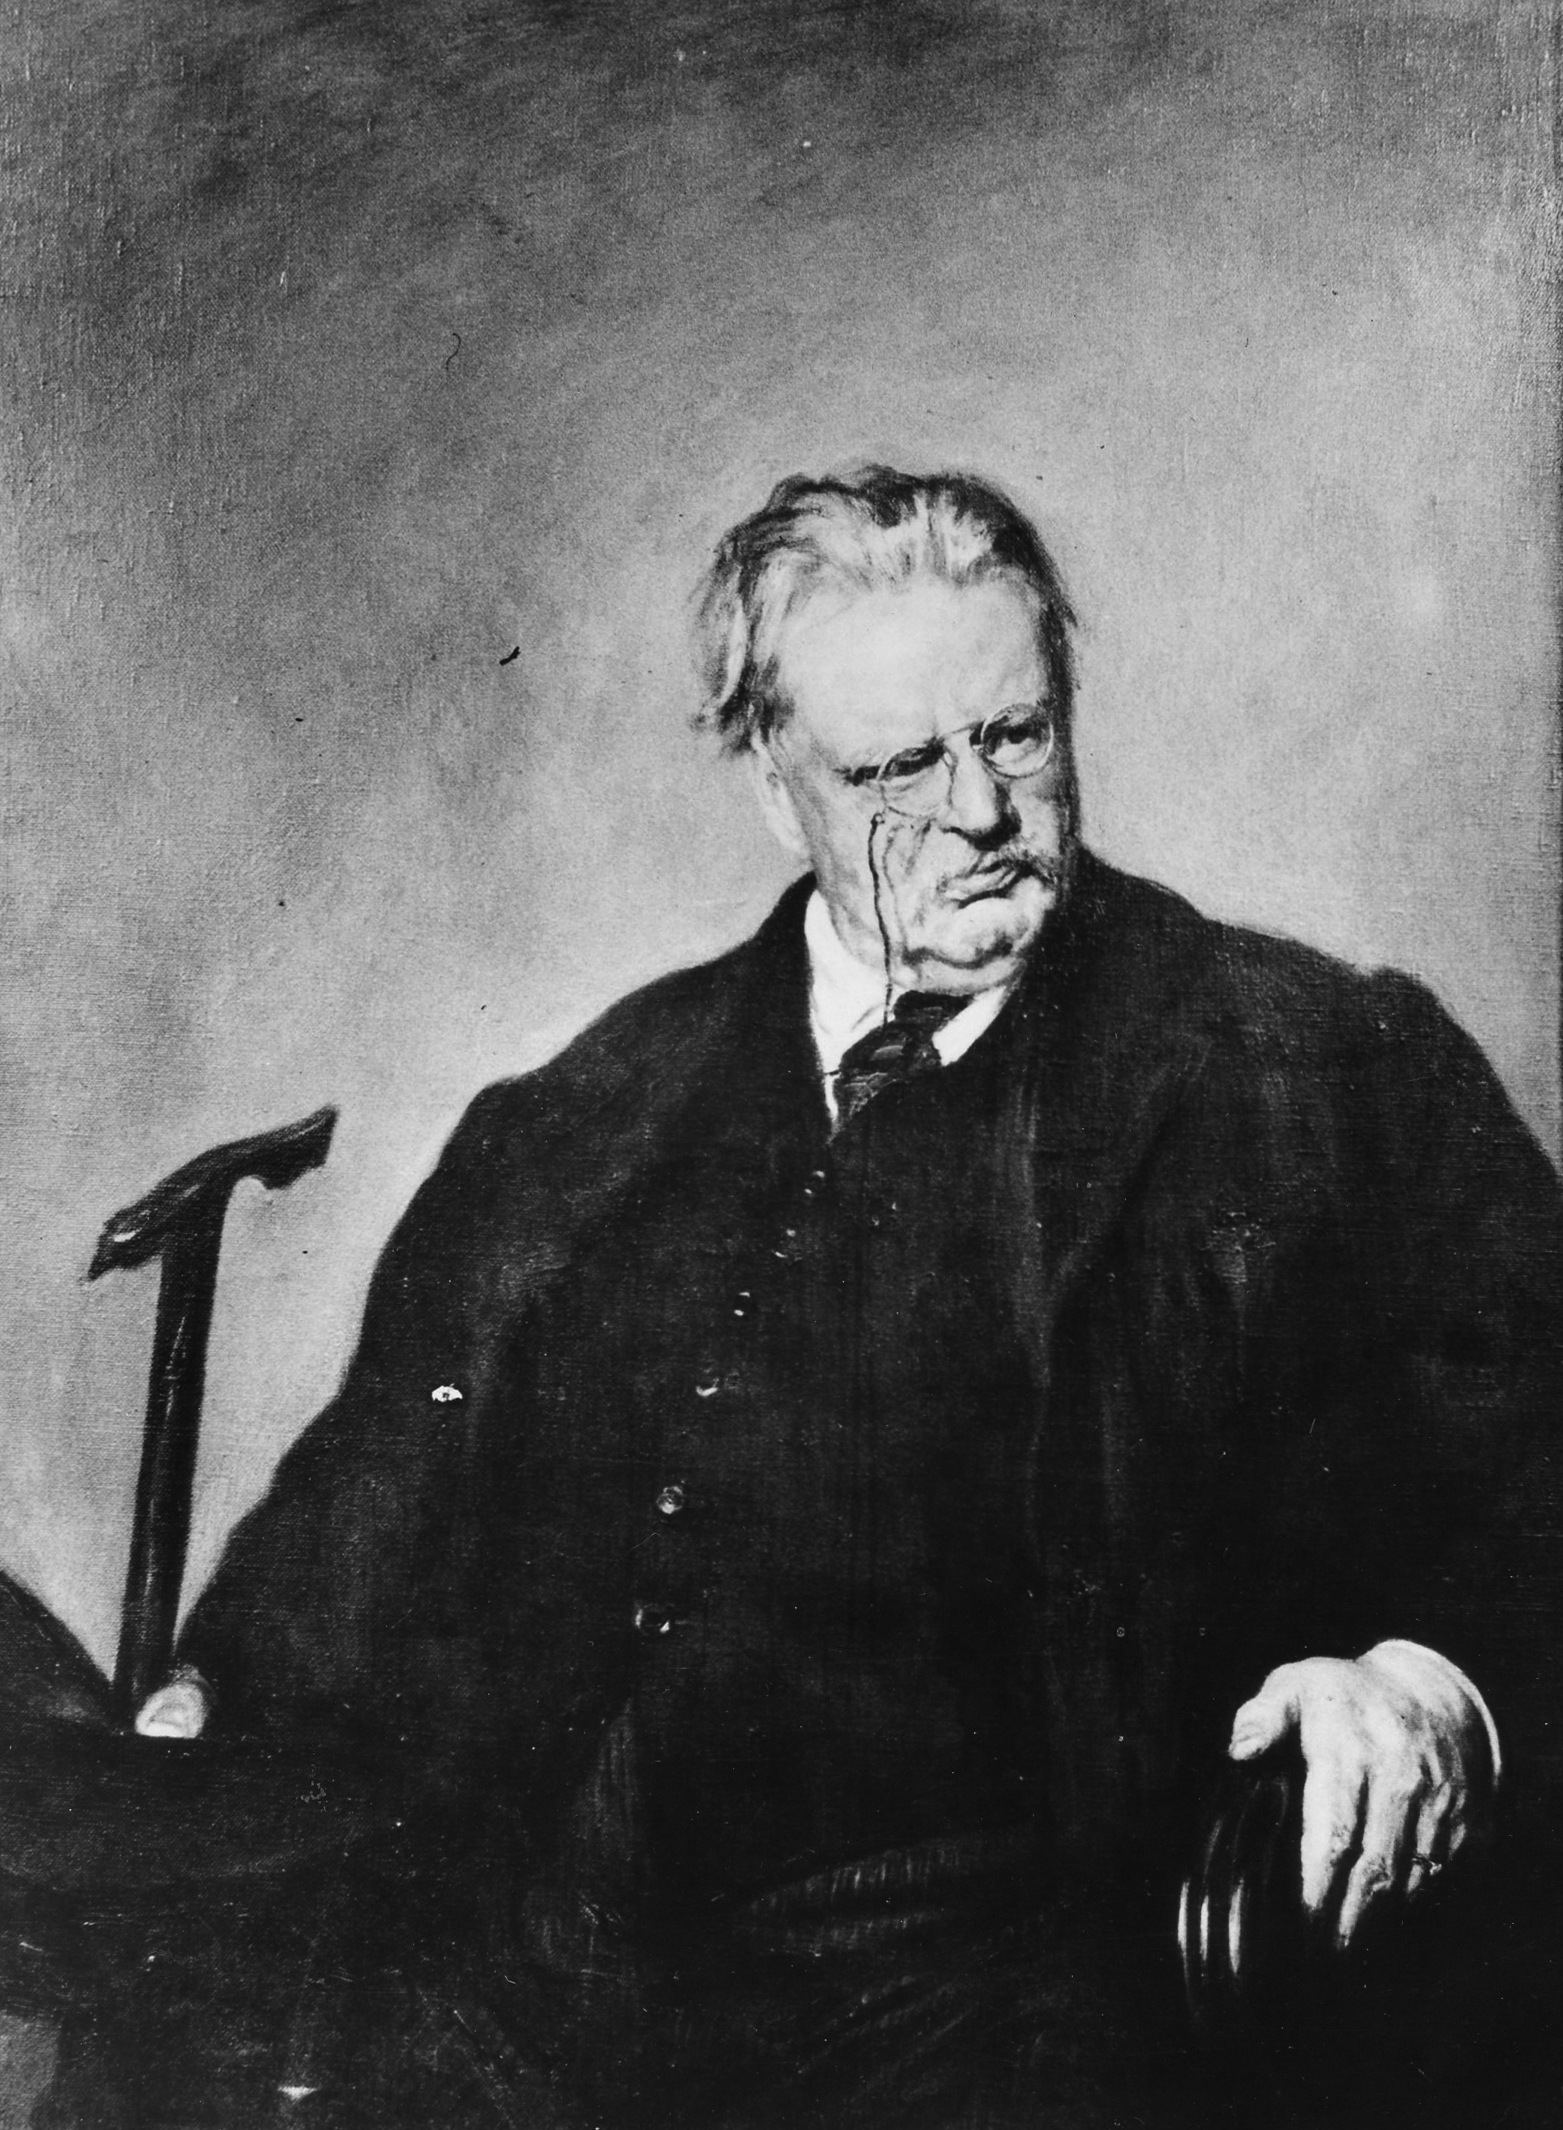 Chesterton deserves to be made a saint, say supporters